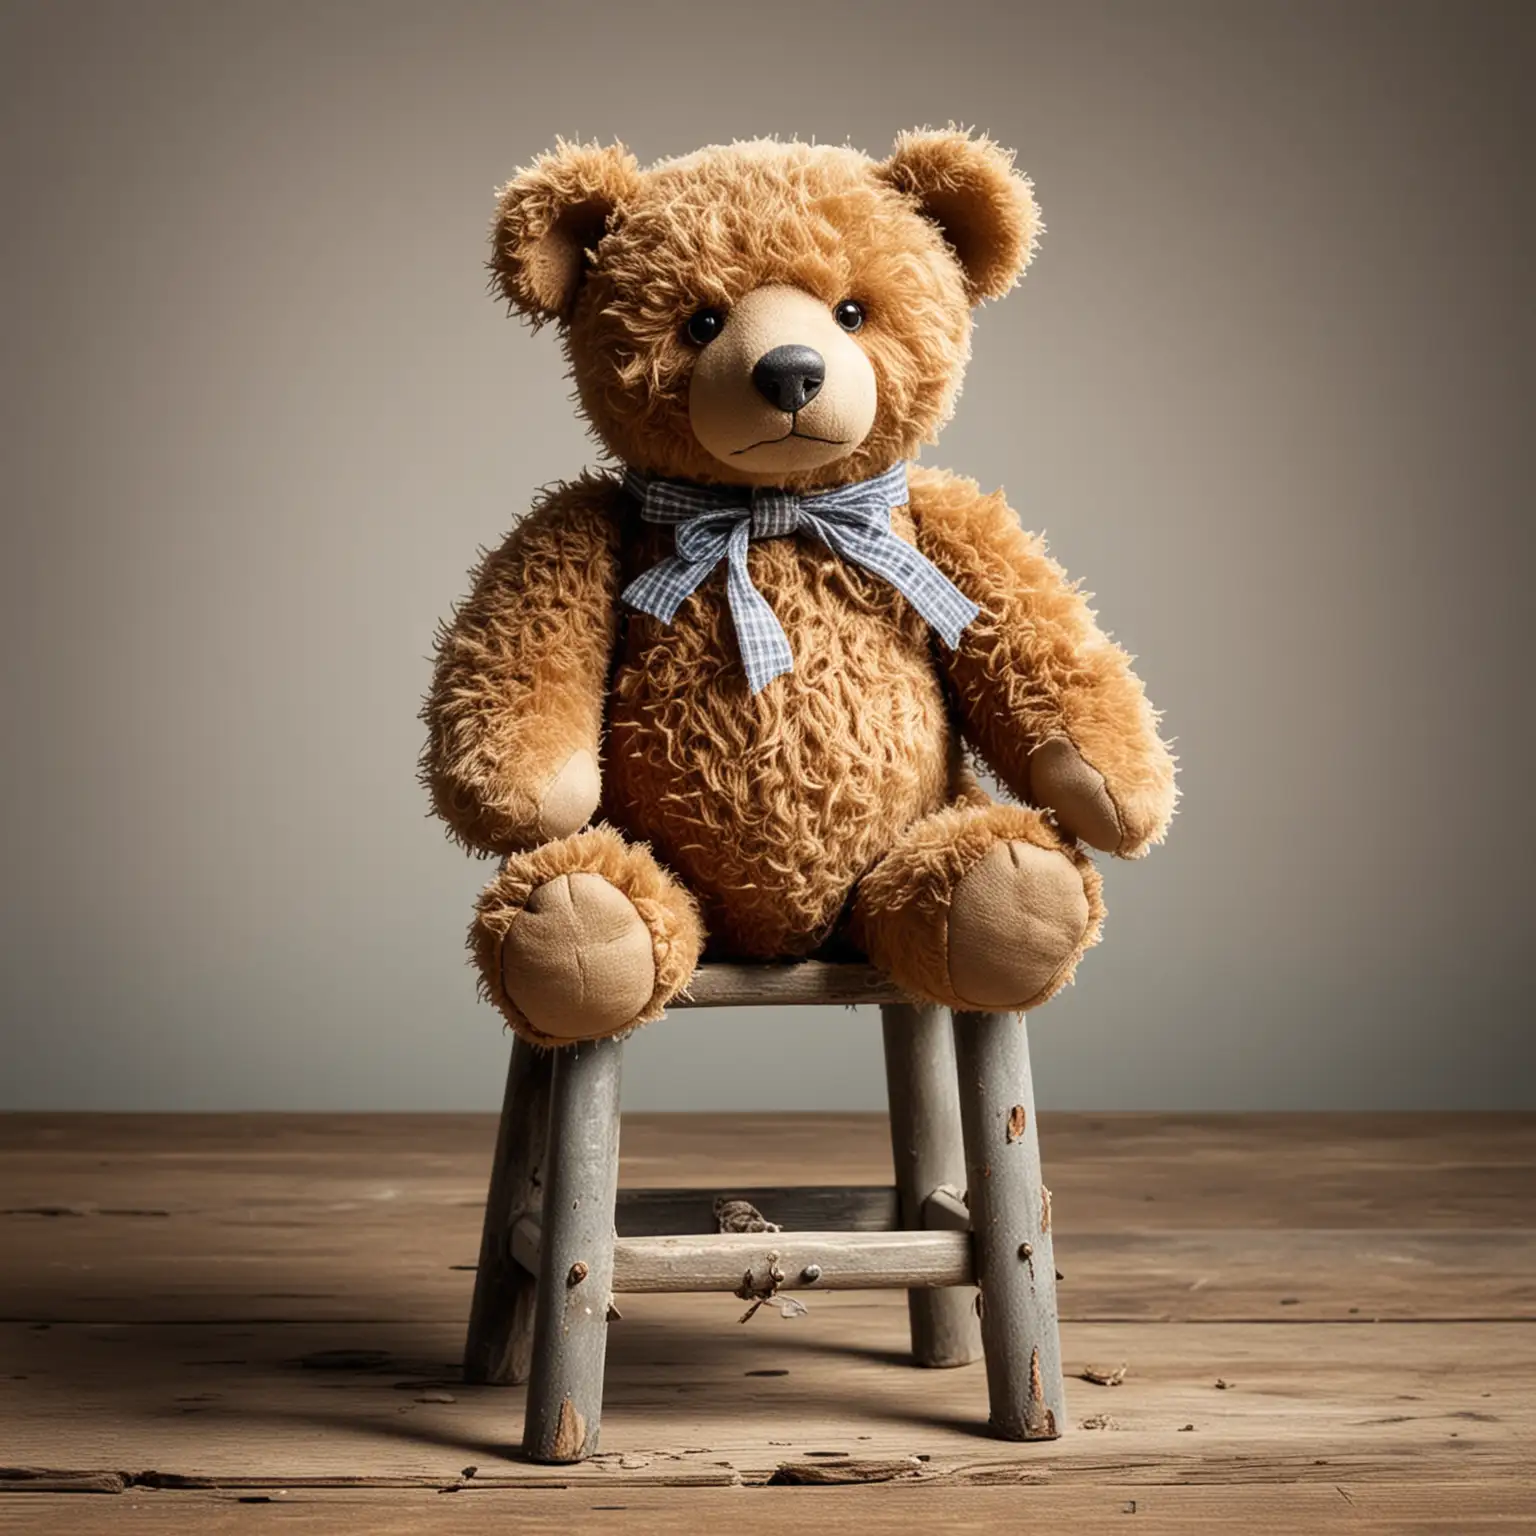 Battered old Teddy Bear sitting on a three-legged stool, no bow around the neck, no background